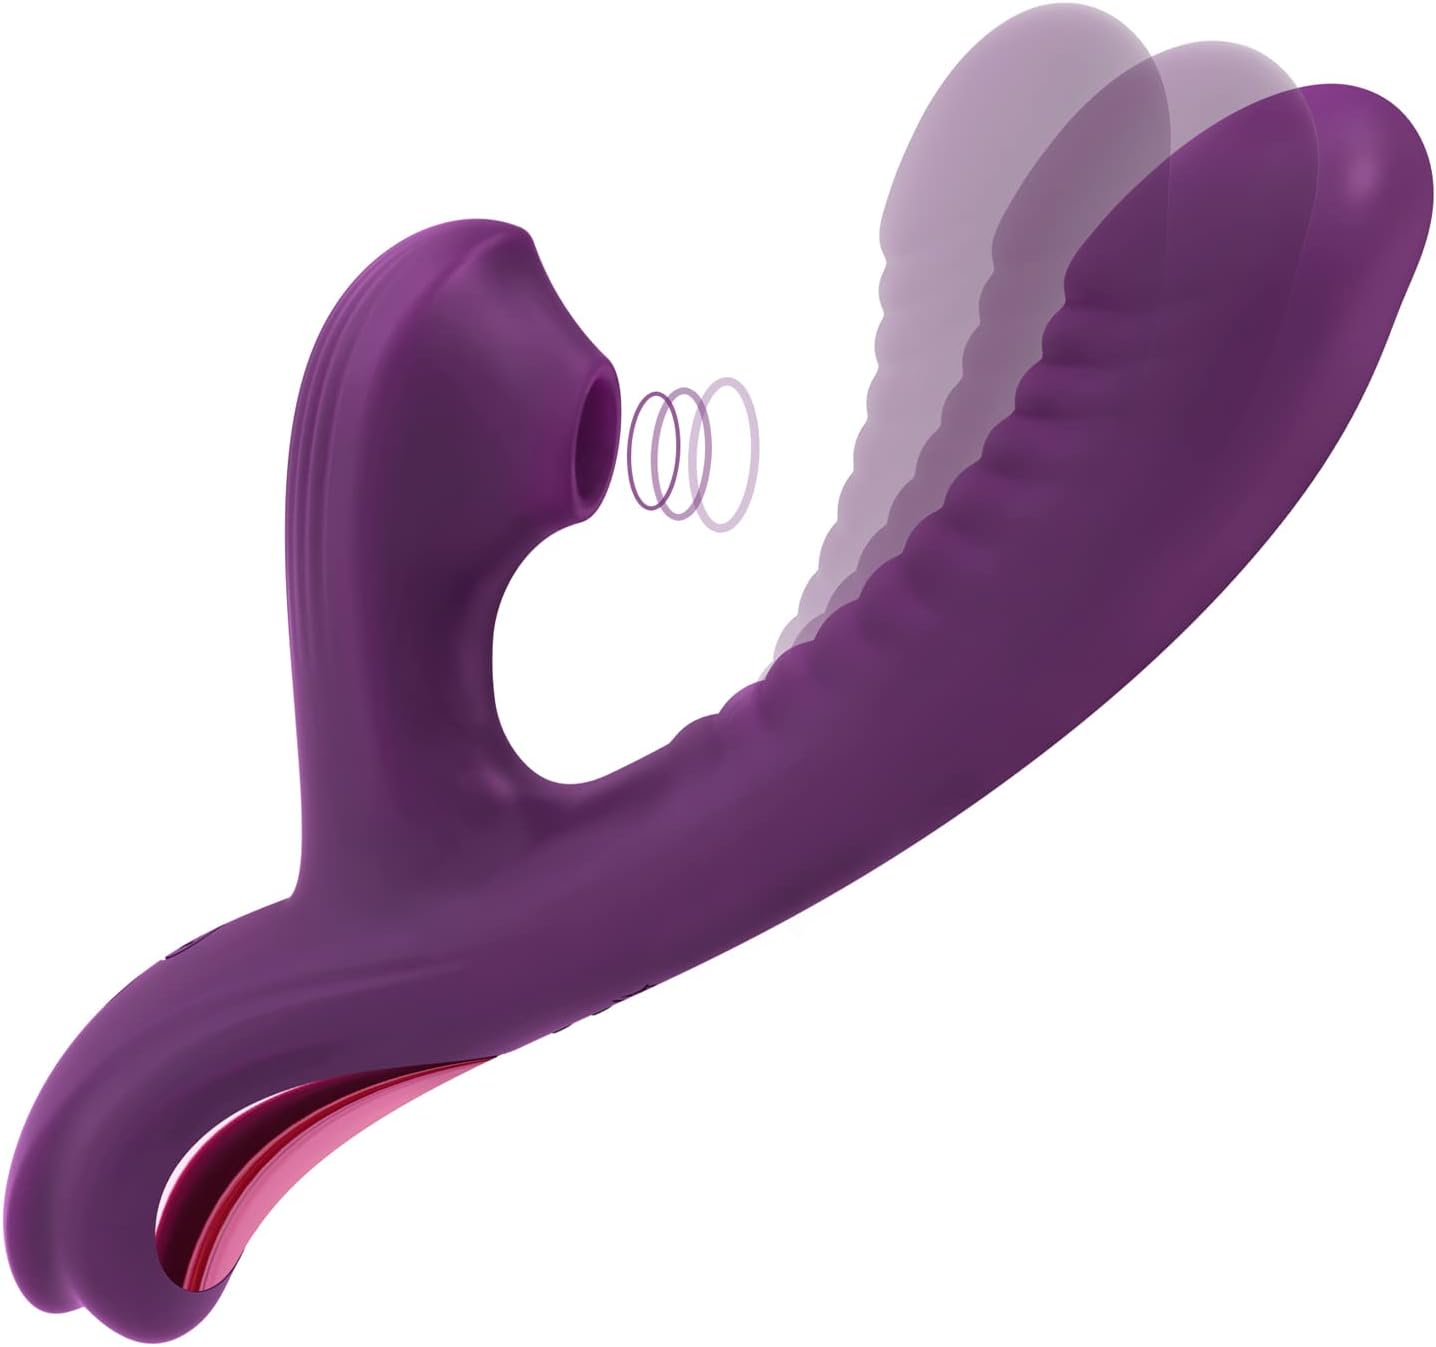 7 Types of Vibrators To Help You Find Your Pleasure in 2023 picture